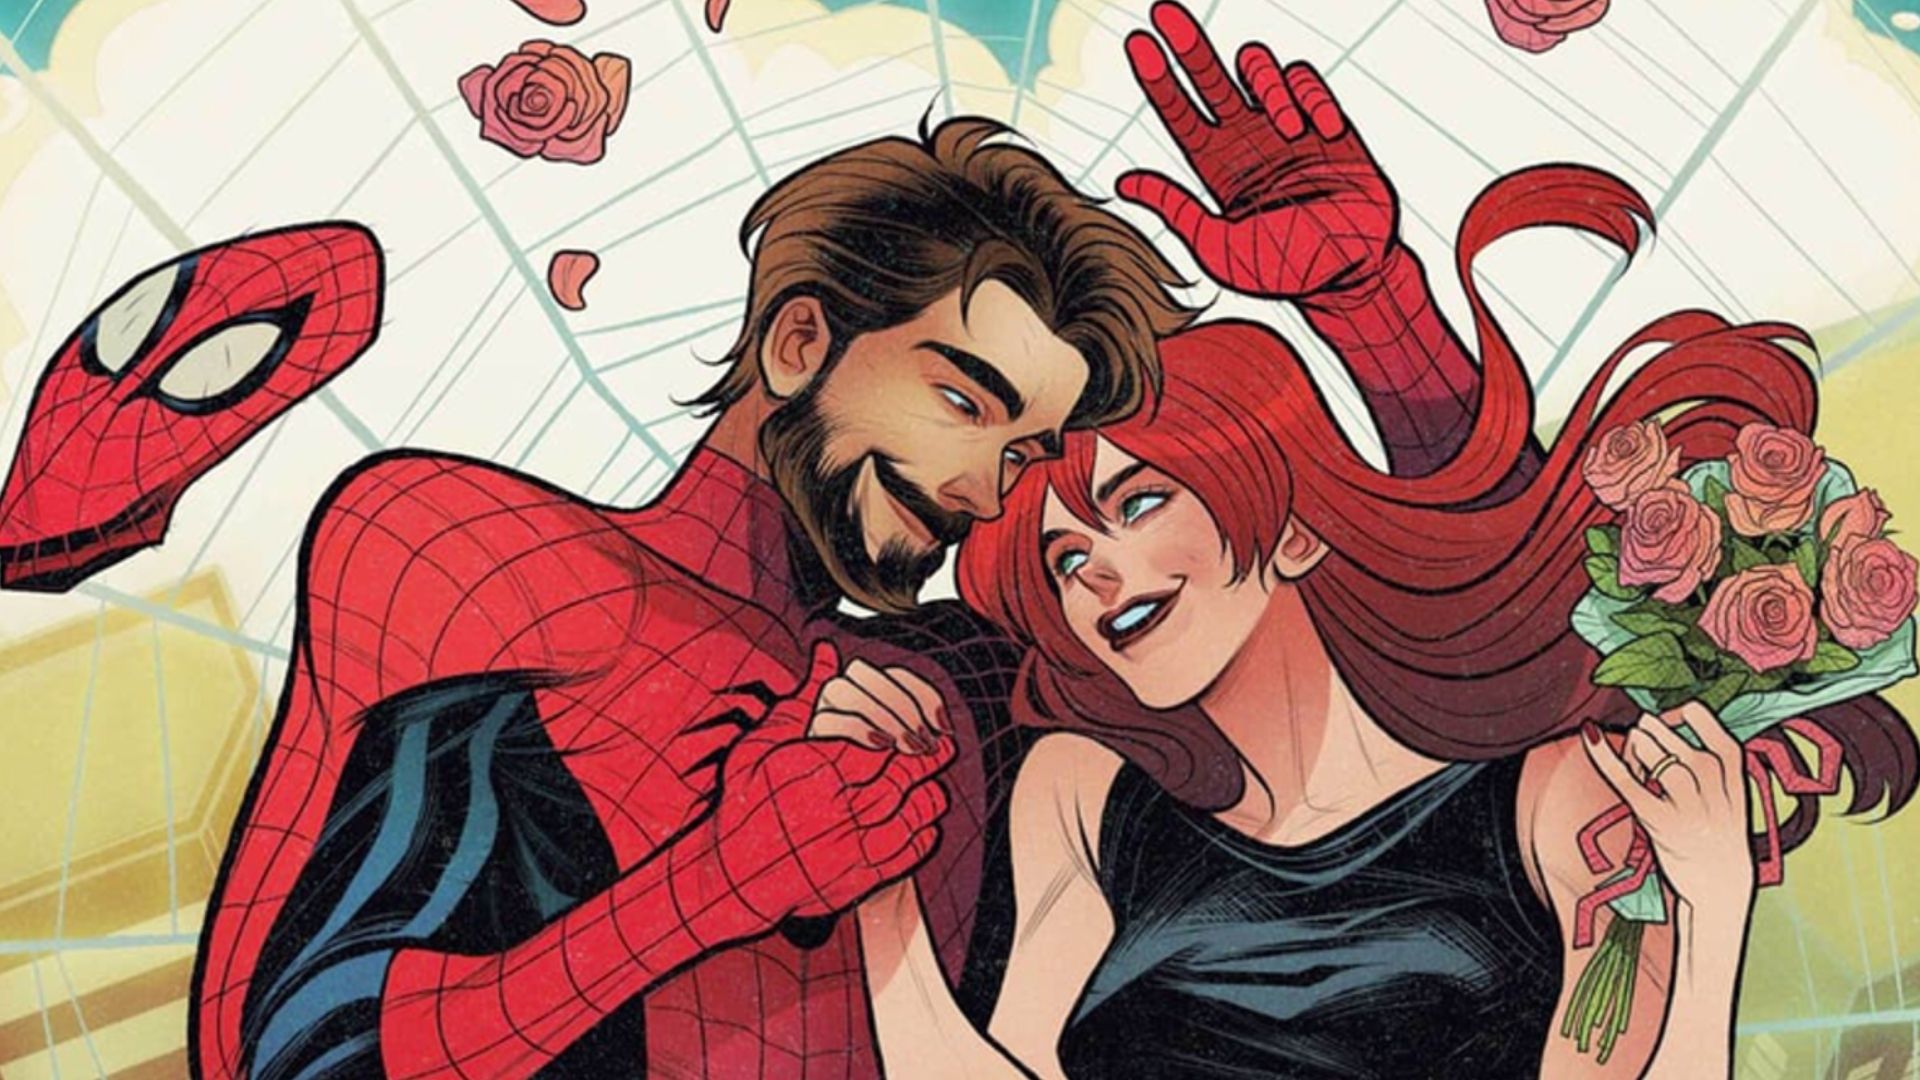 Adult Peter Parker and MJ Watson lay on a web holding hands. MJ holds flowers and Peter's mask lays on the web nearby.